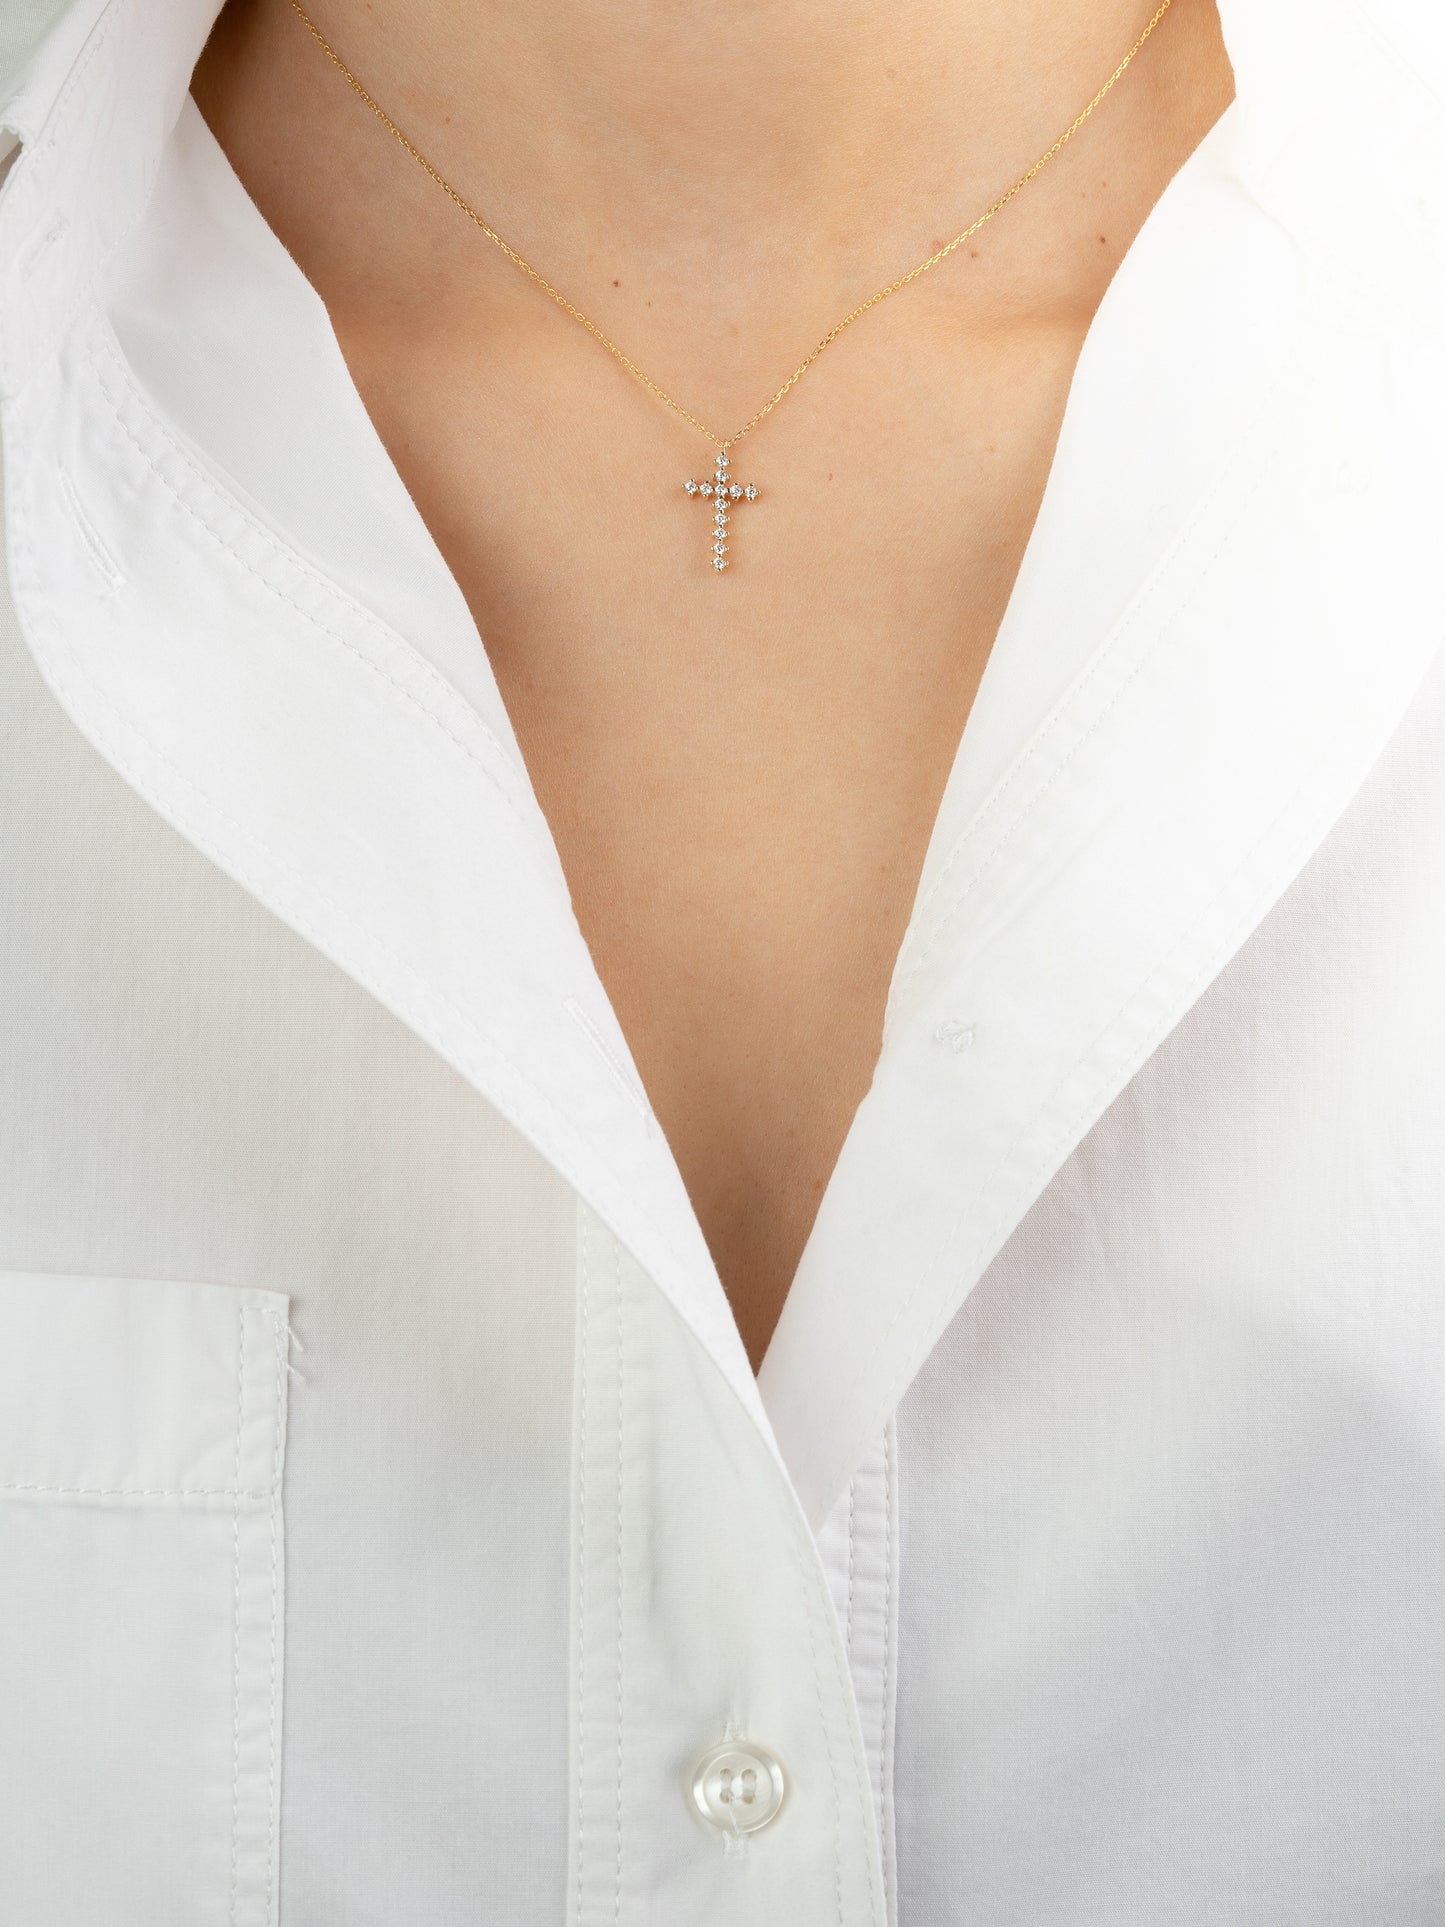 SOLID GOLD AELIA CROSS NECKLACE